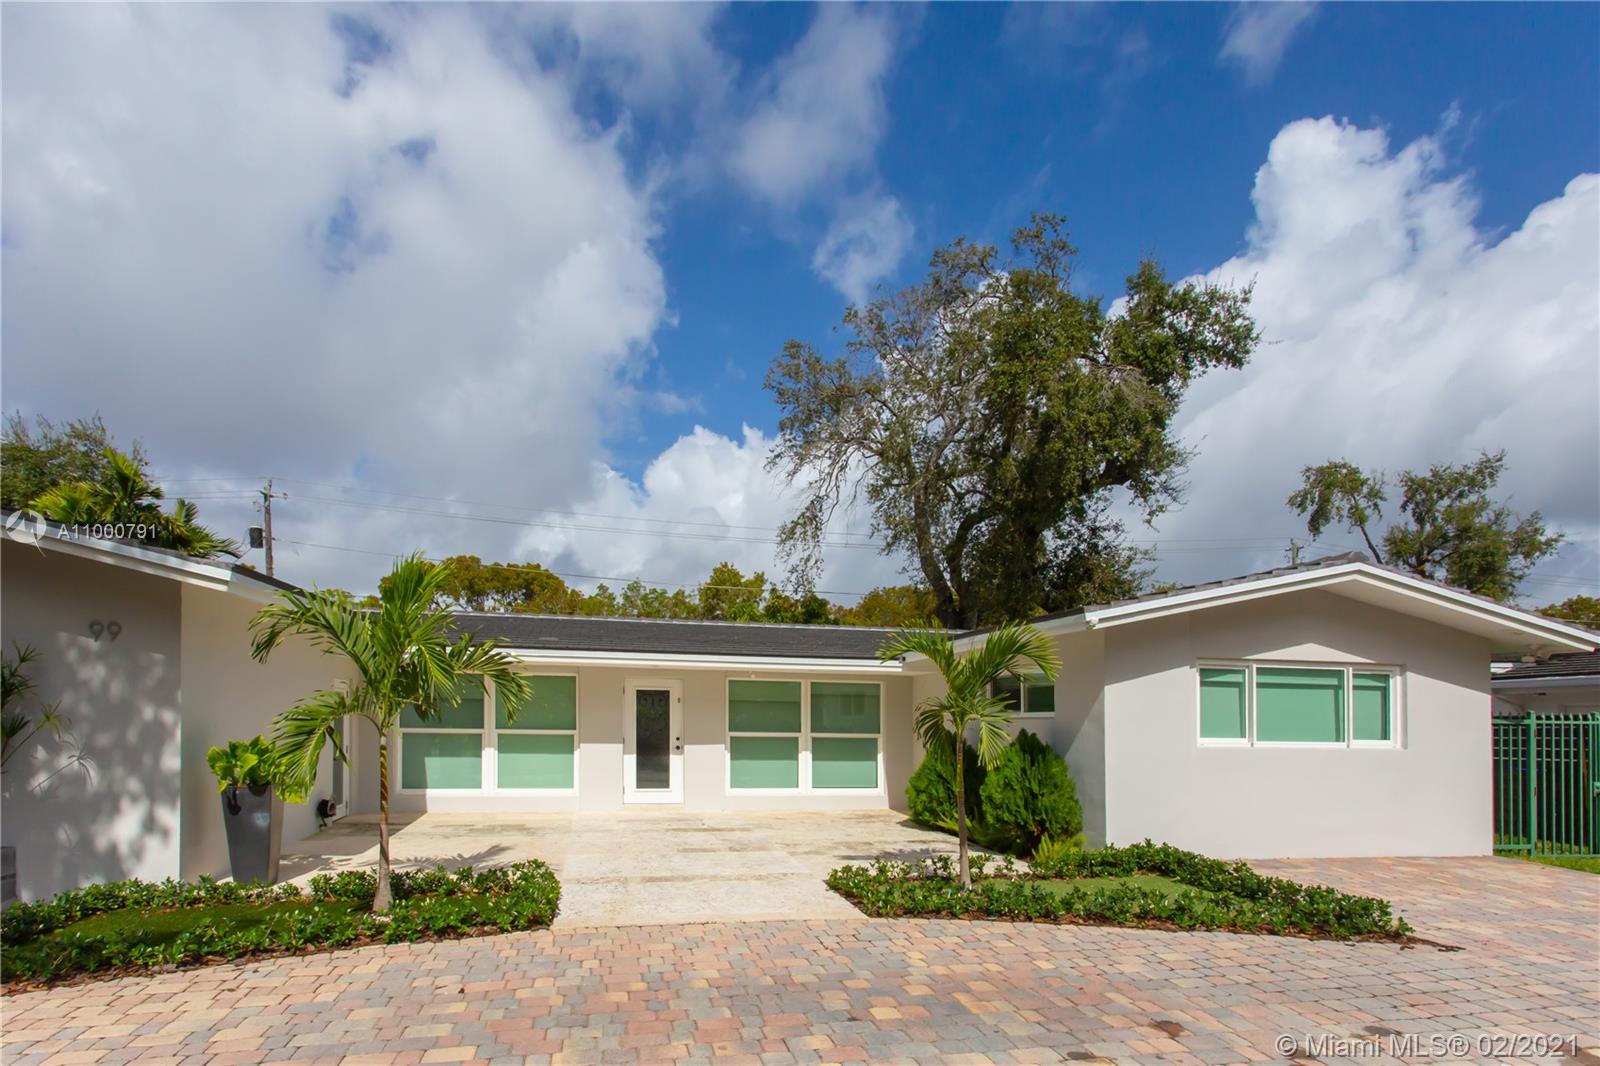 Beautiful one-story home in the upscale Bay Heights neighborhood in Coconut Grove. Spacious, bright, airy home with 4 bedrooms and 3 full bathrooms plus an oversized bonus room that is perfect for a home office or recreation room with access from both inside and outside the house. The living room and family room feature large glass sliding doors that open to the pool and terrace area. Enjoy the screened-in cabana with ample space for entertaining. A new roof was just installed in 2017. Impact windows in the front of the house. Circular driveway with room for multiple cars and/or a boat. Electric privacy gates. Excellent location, across from Vizcaya Museum and Gardens. Close to Mercy Hospital, Marinas, Parks, top-rated school, and more. 1 YEAR HOME WARRANTY PLAN INCLUDED FOR BUYER.